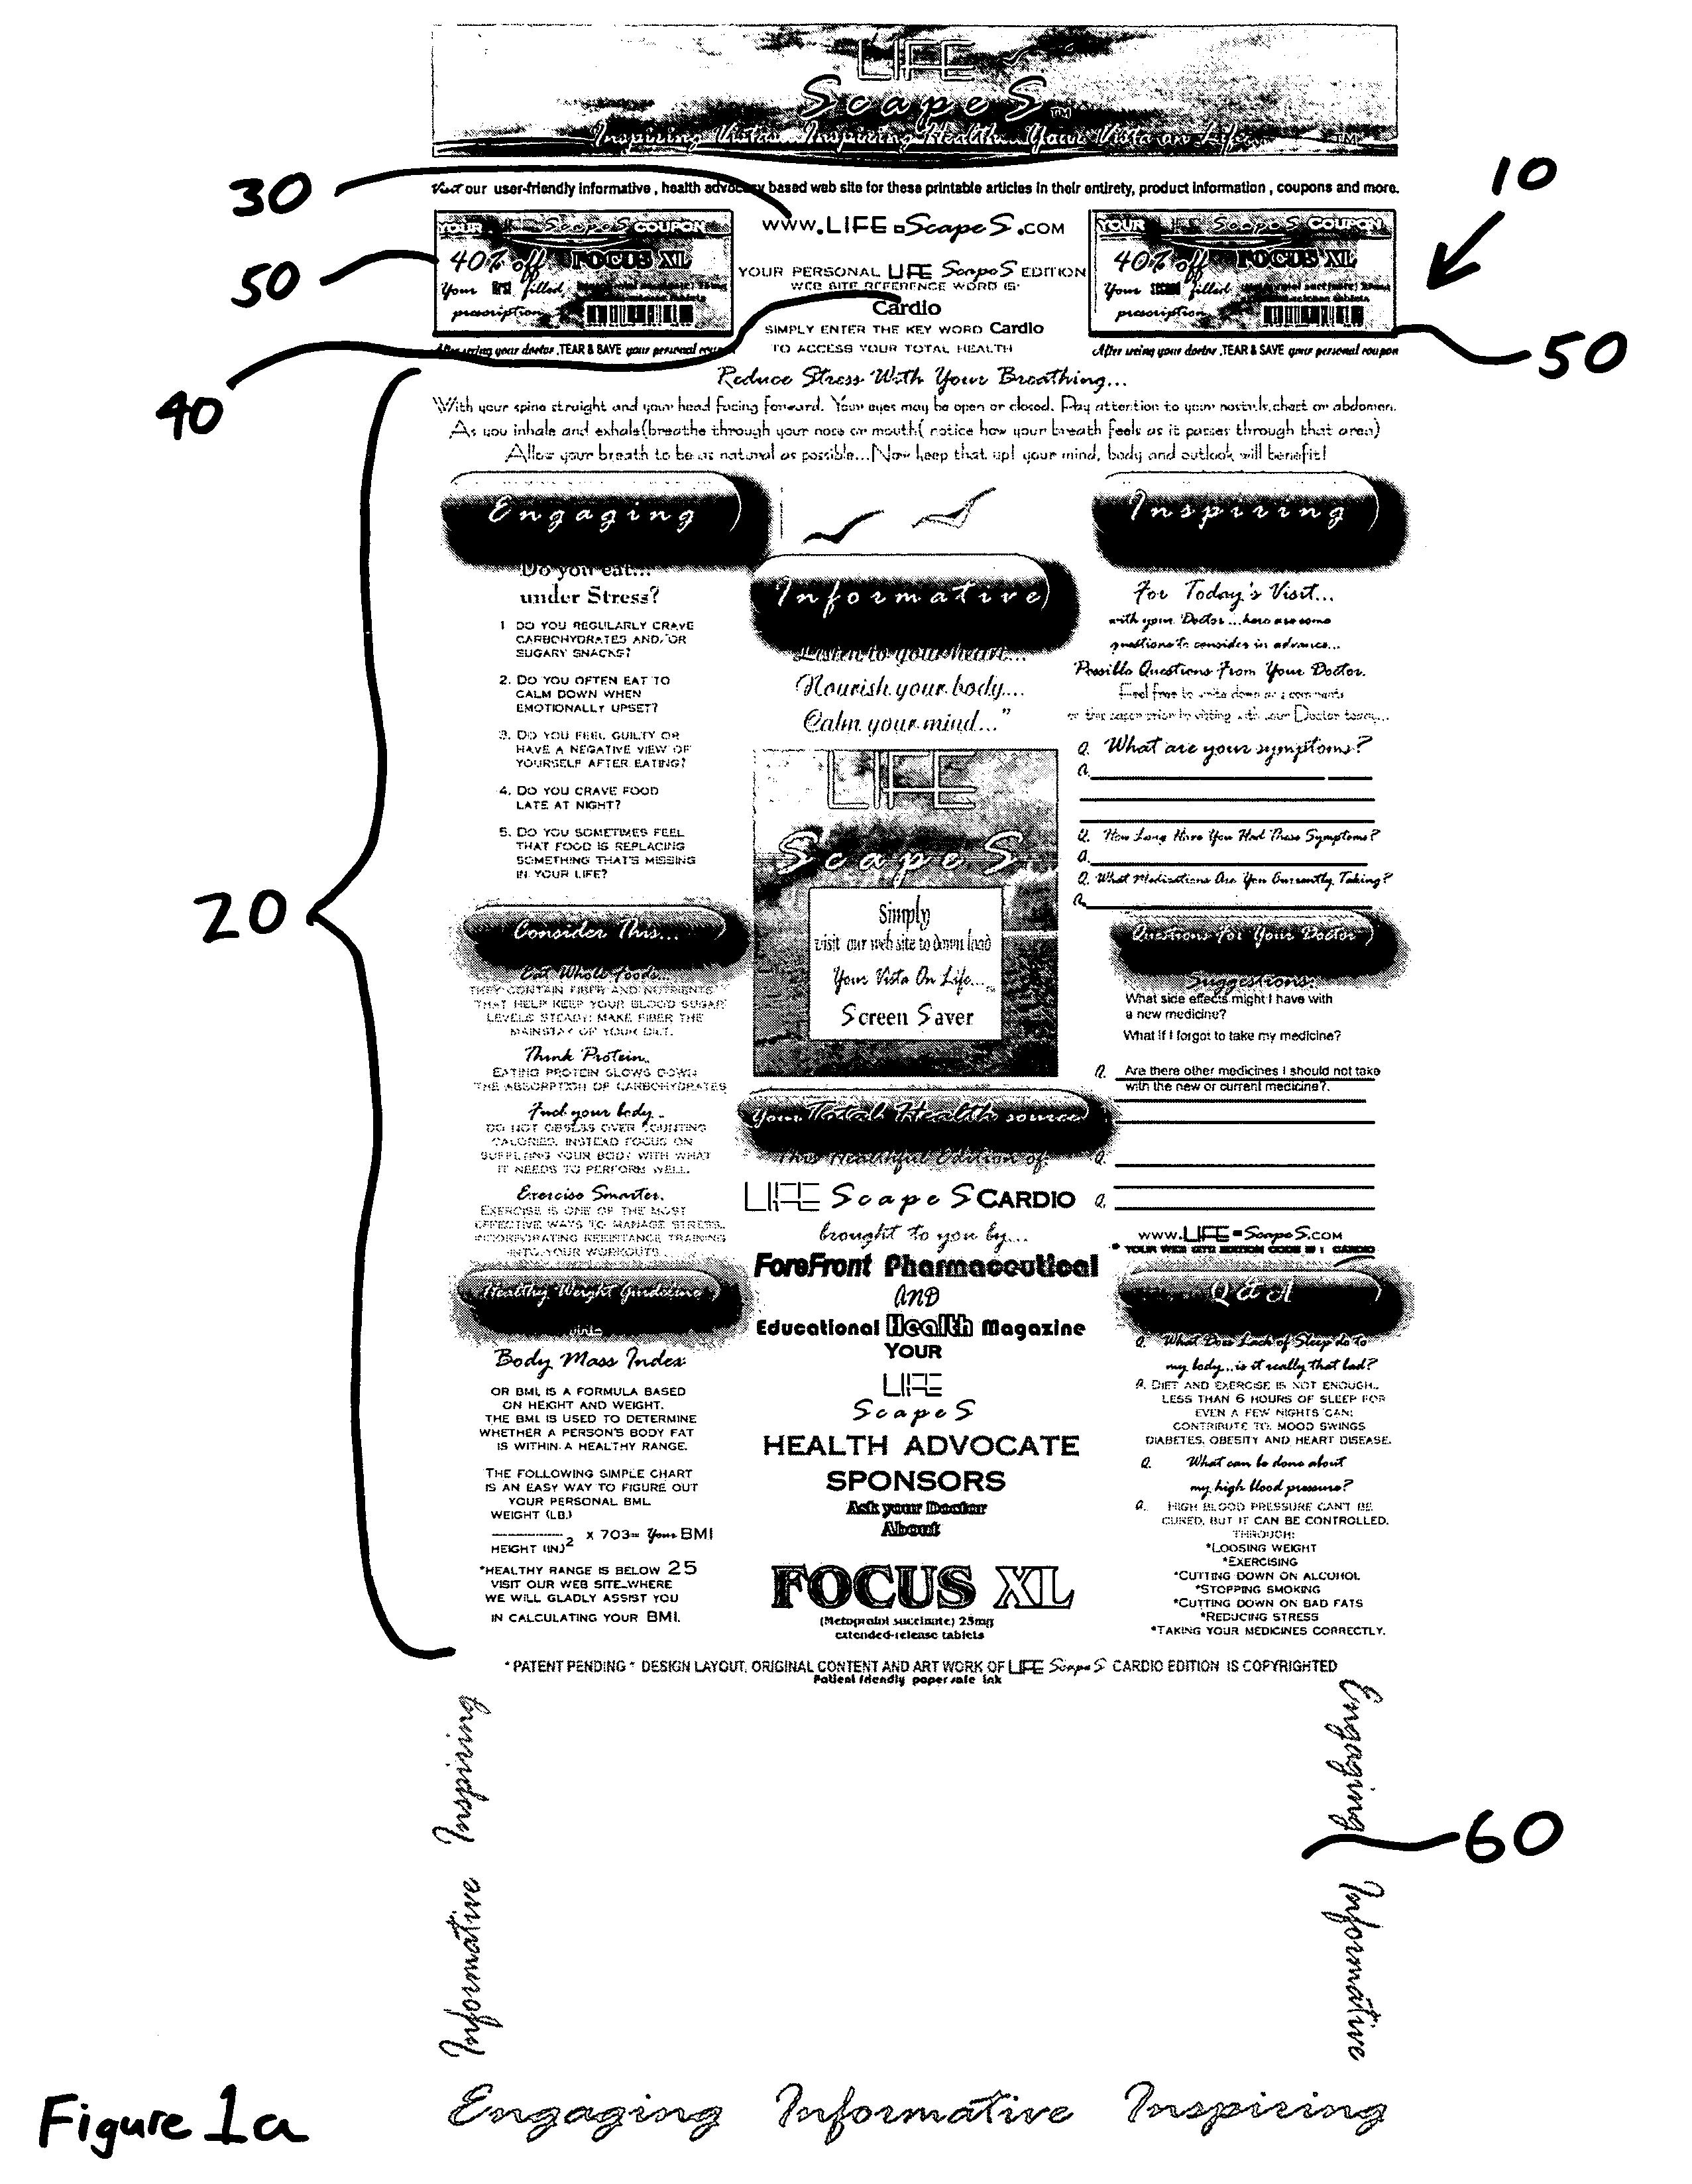 System and method for targeted education and advertising